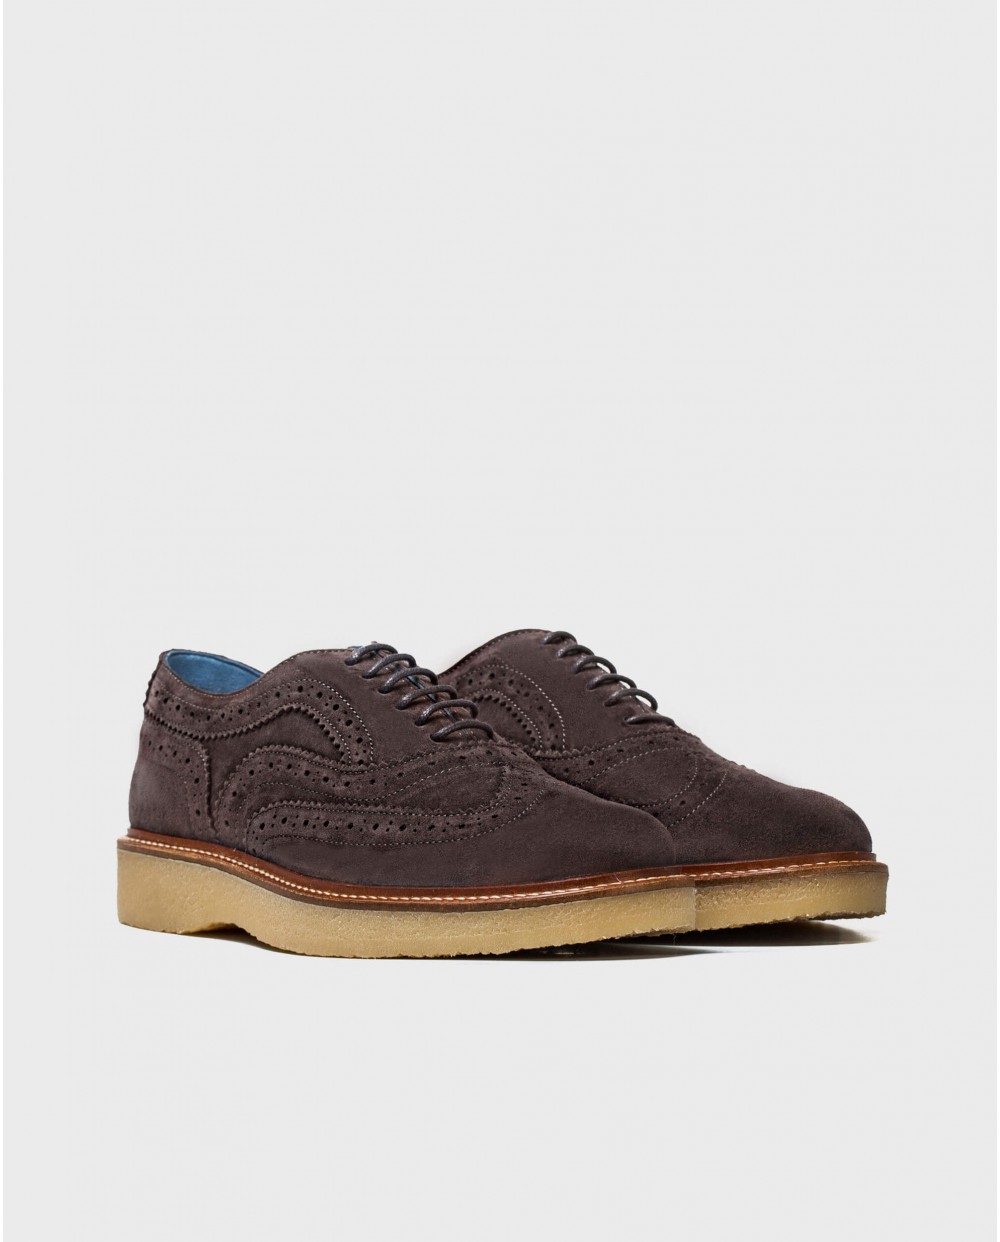 Leather shoe with brogue detail